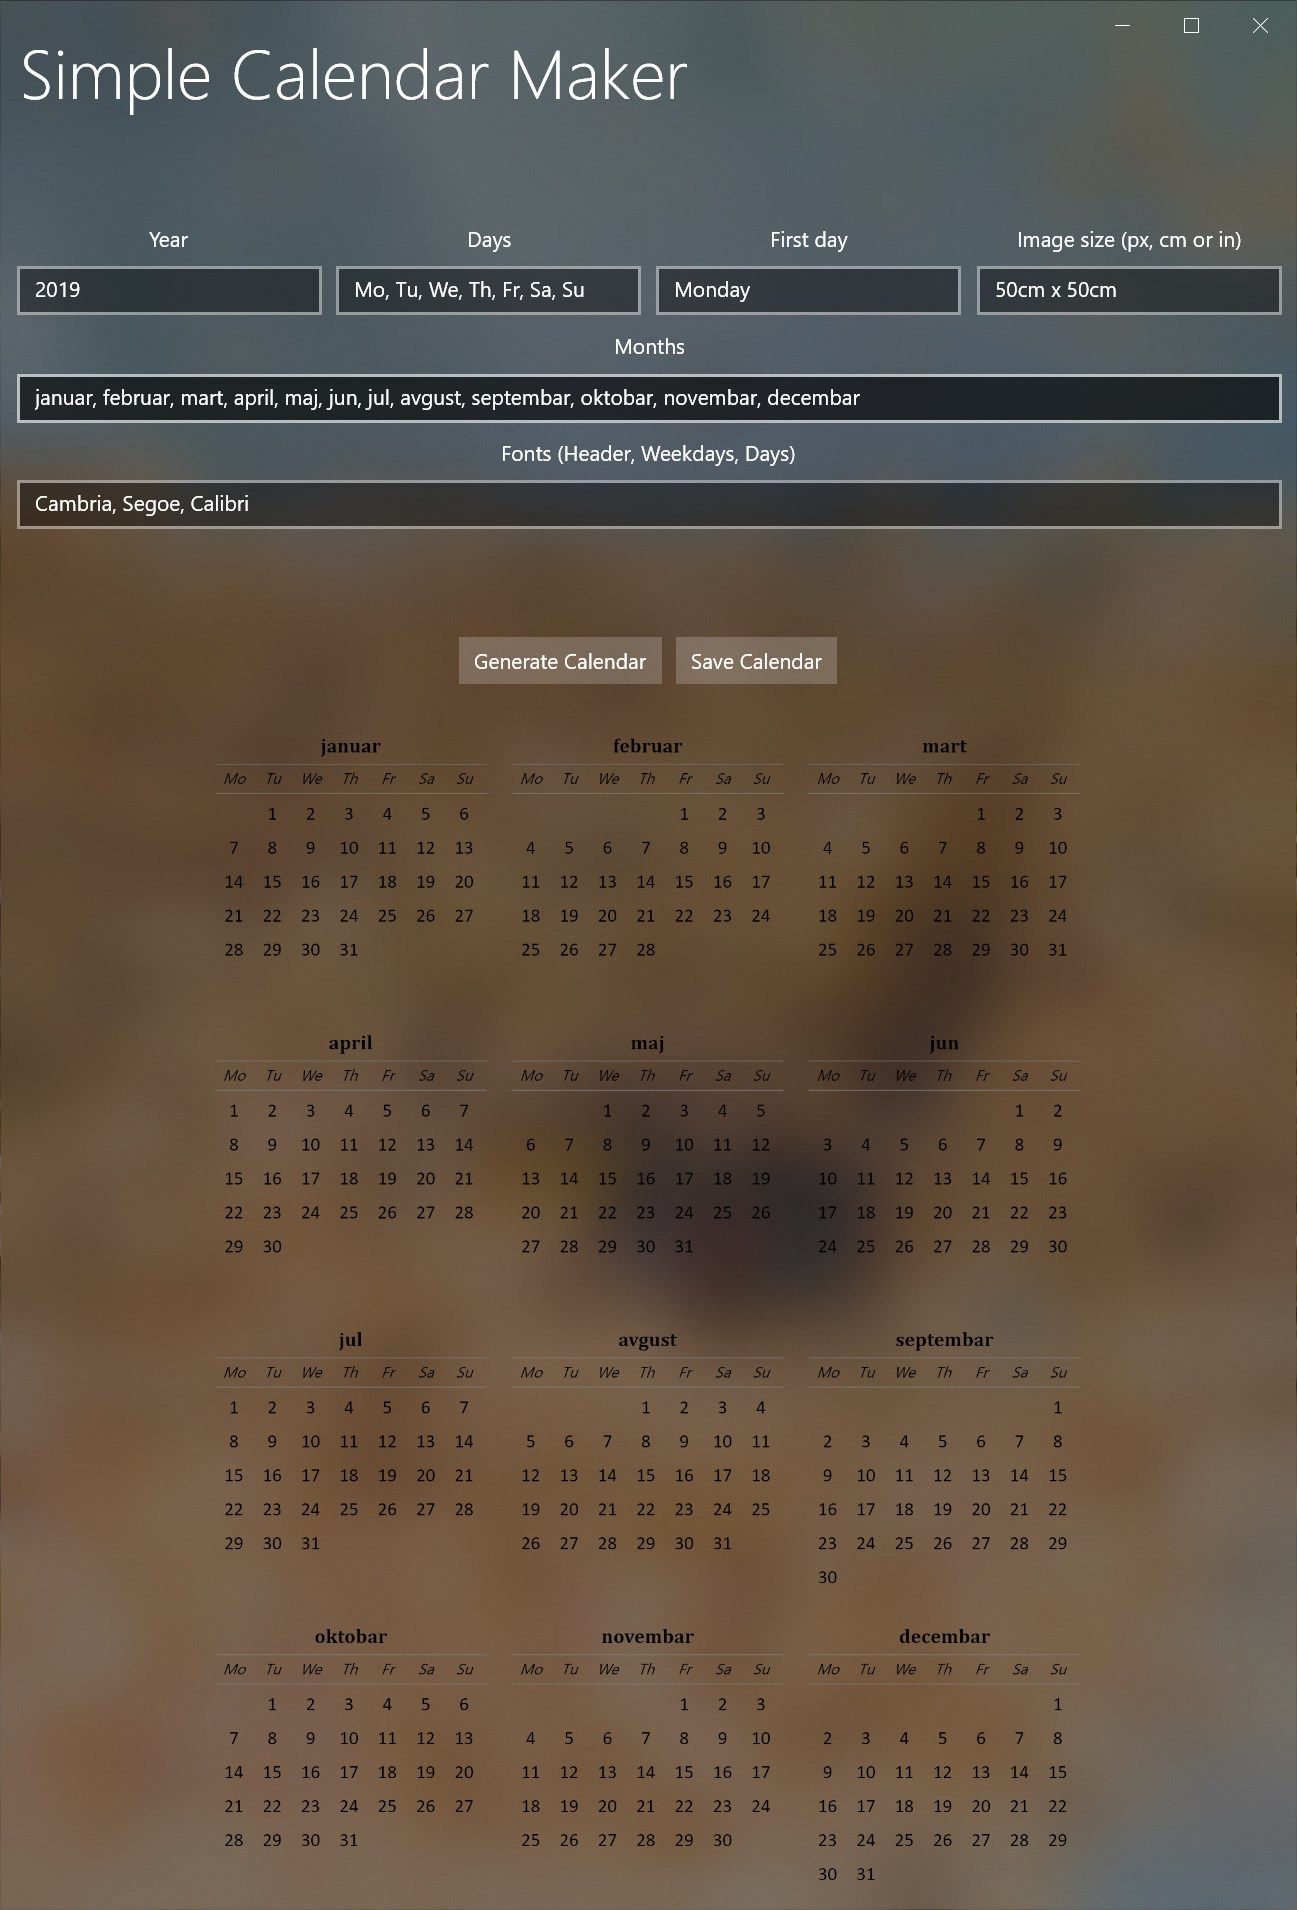 Dark theme and a calendar in a different language